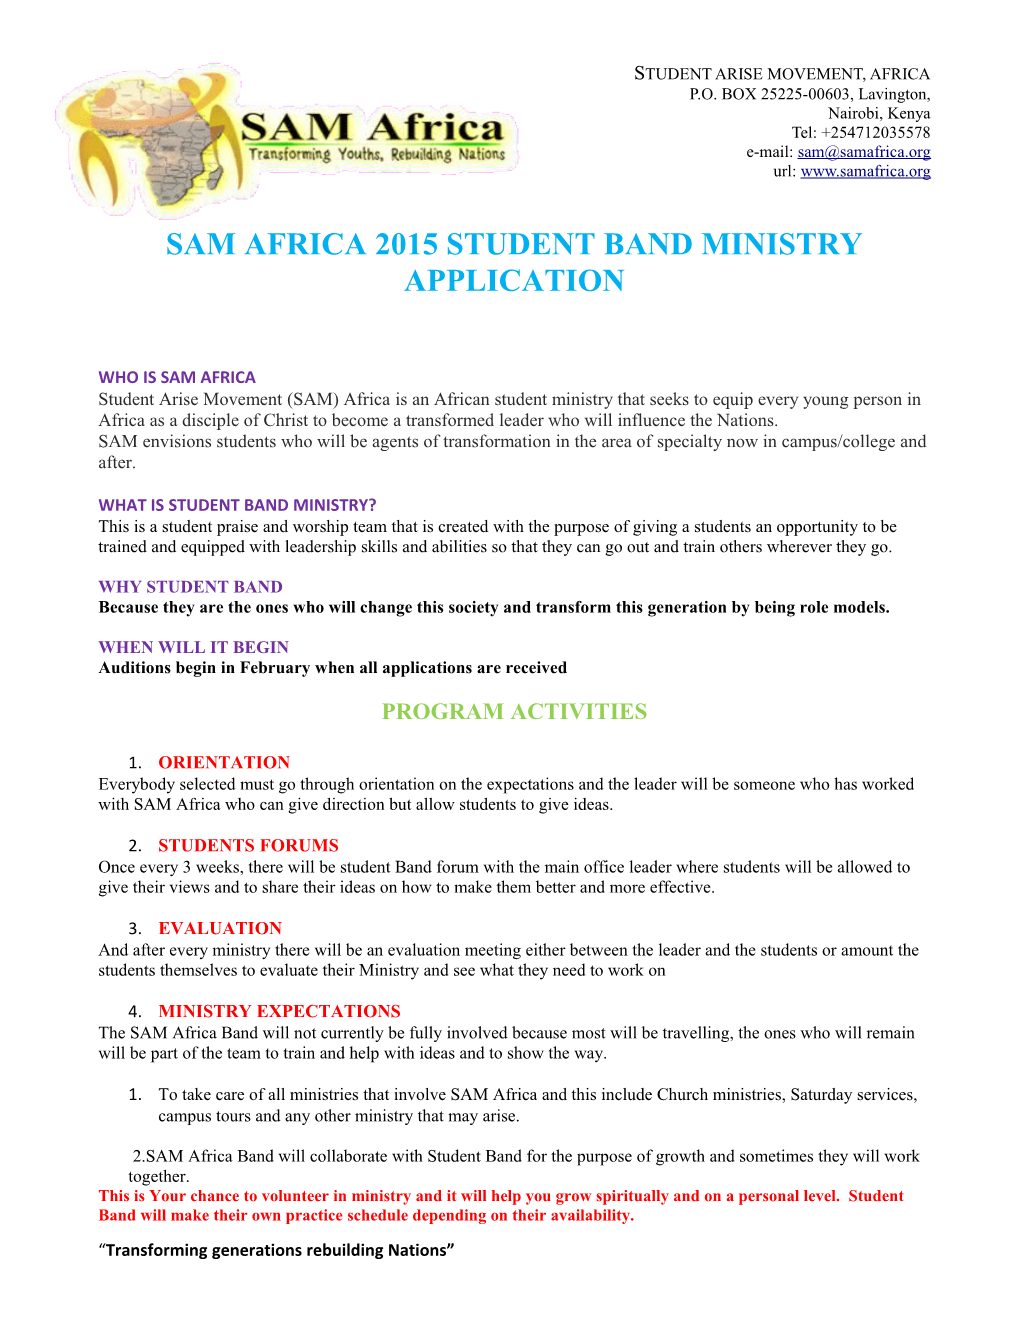 Sam Africa 2015 Student Band Ministry Application